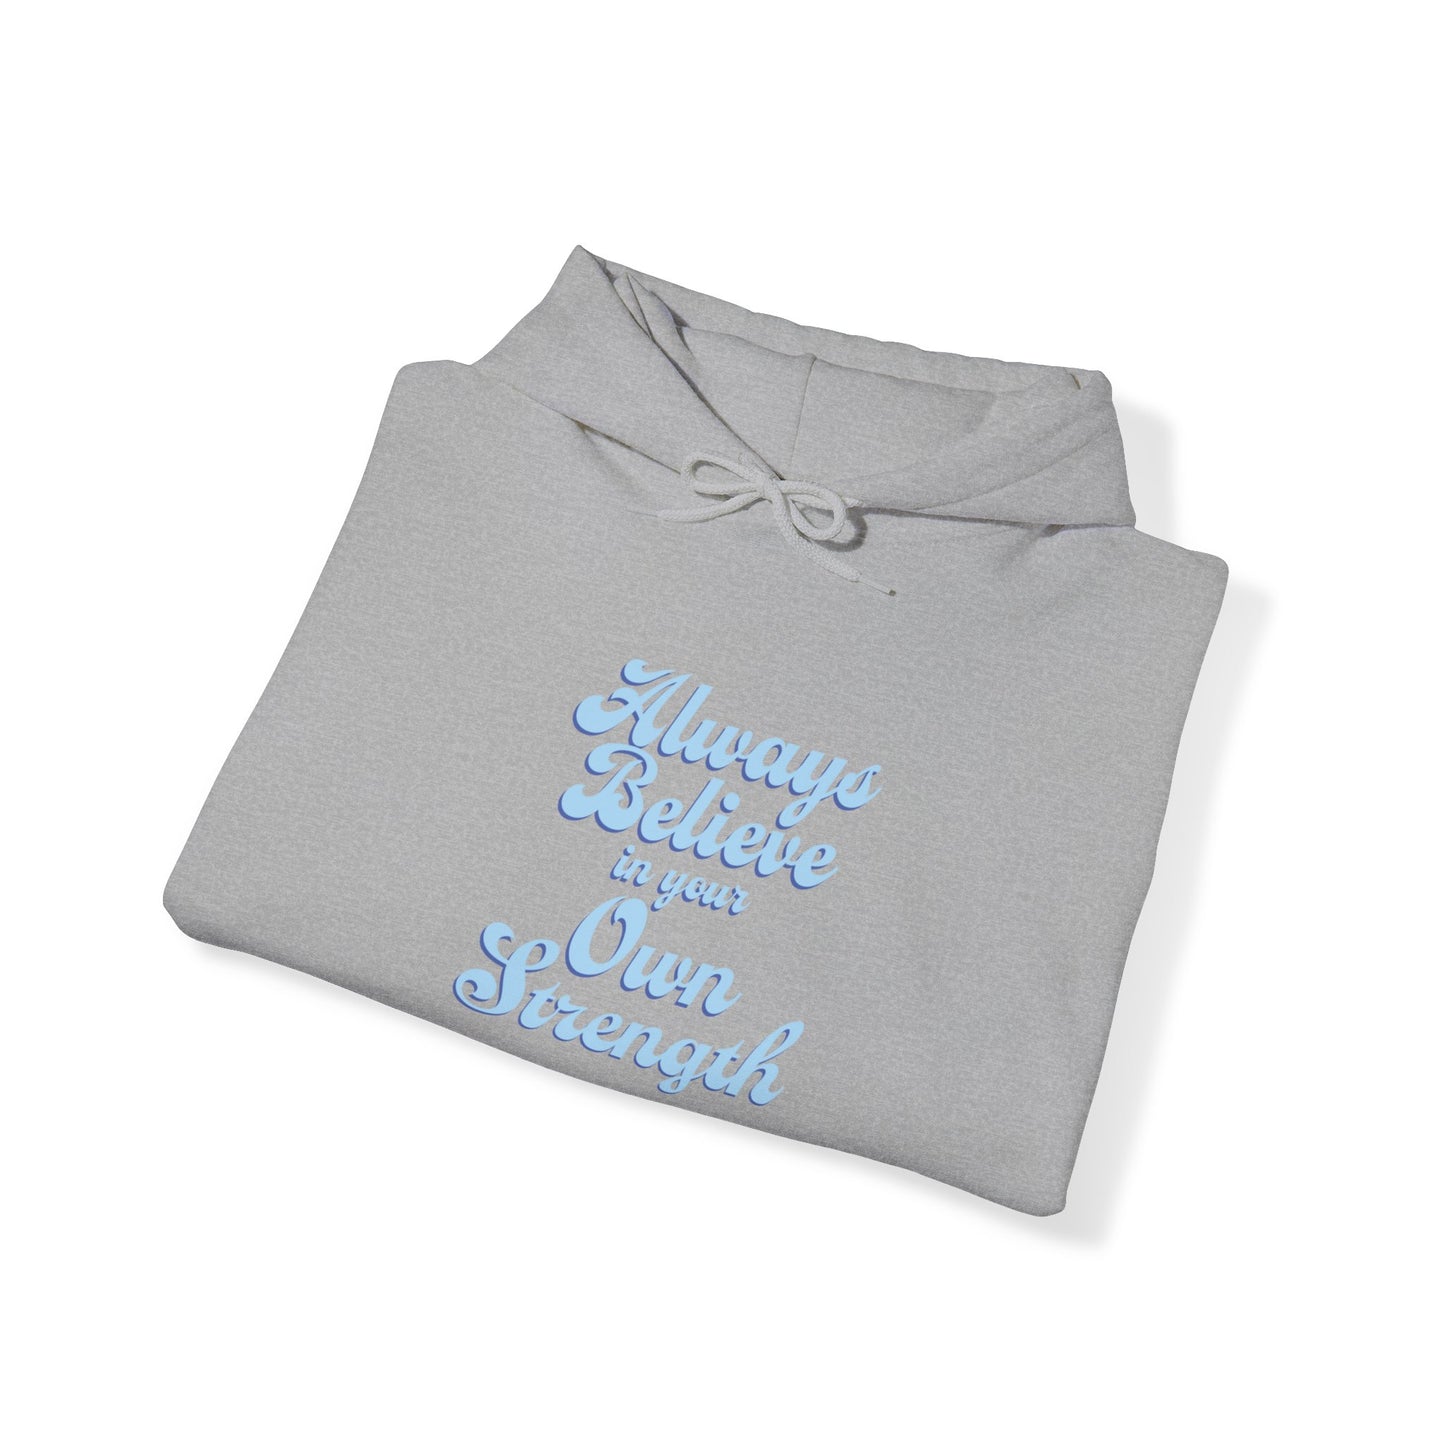 Olivia Hill: Always Believe In Your Own Strength Hoodie